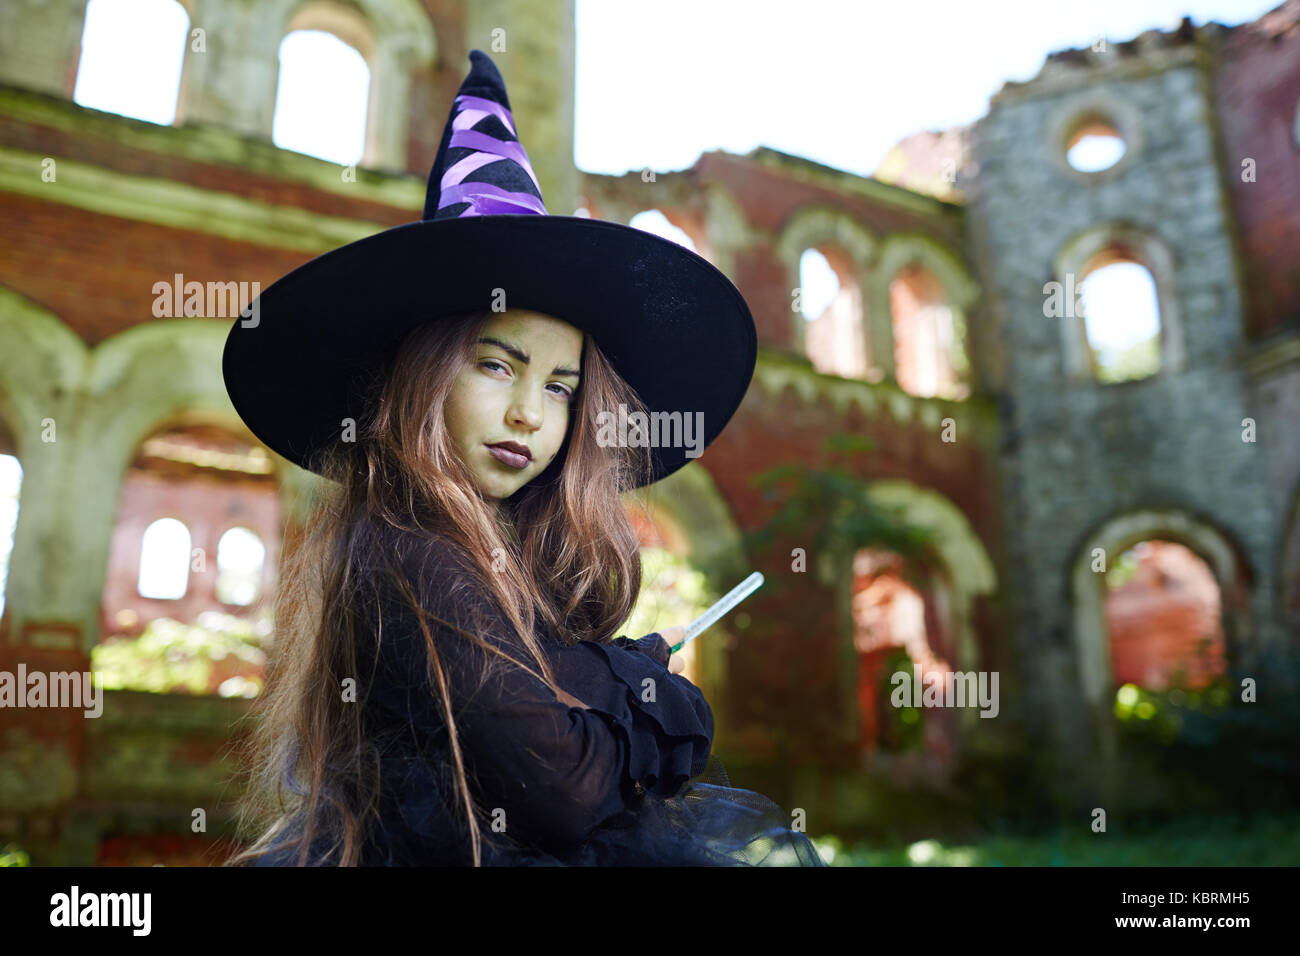 Sly witch Stock Photo